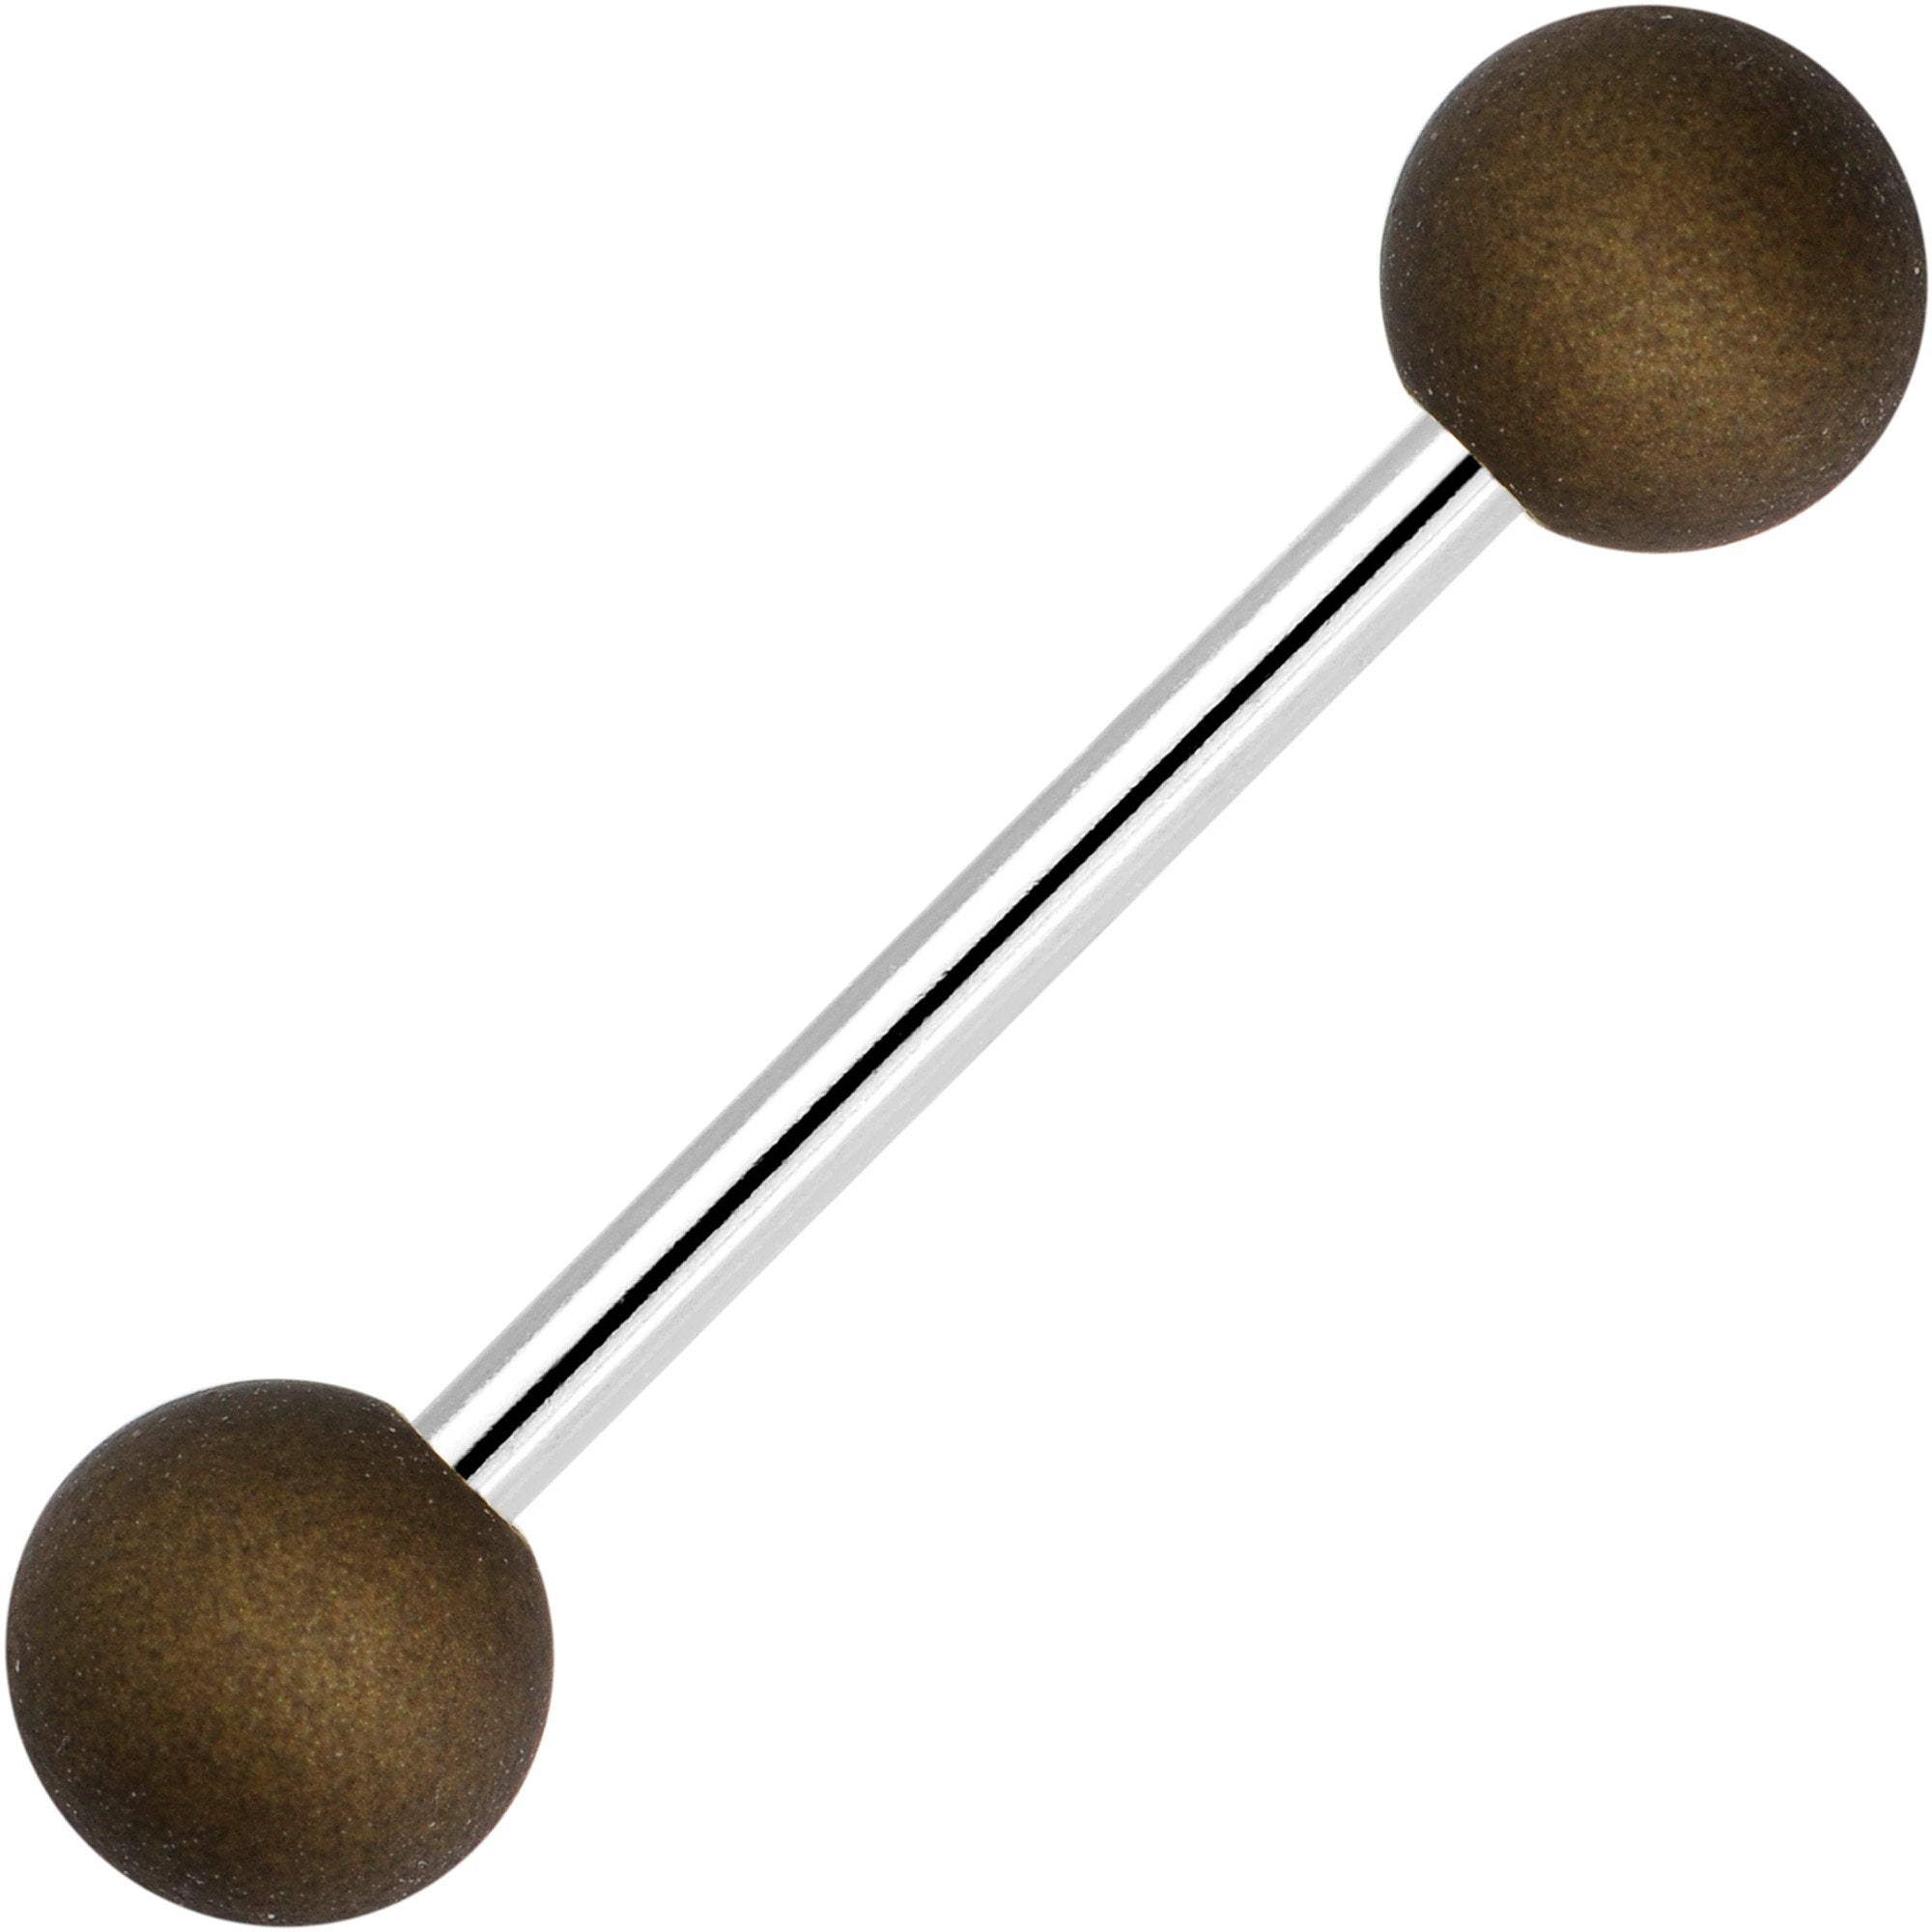 Brown Silicone Coated Acrylic Ball End Barbell Tongue Ring